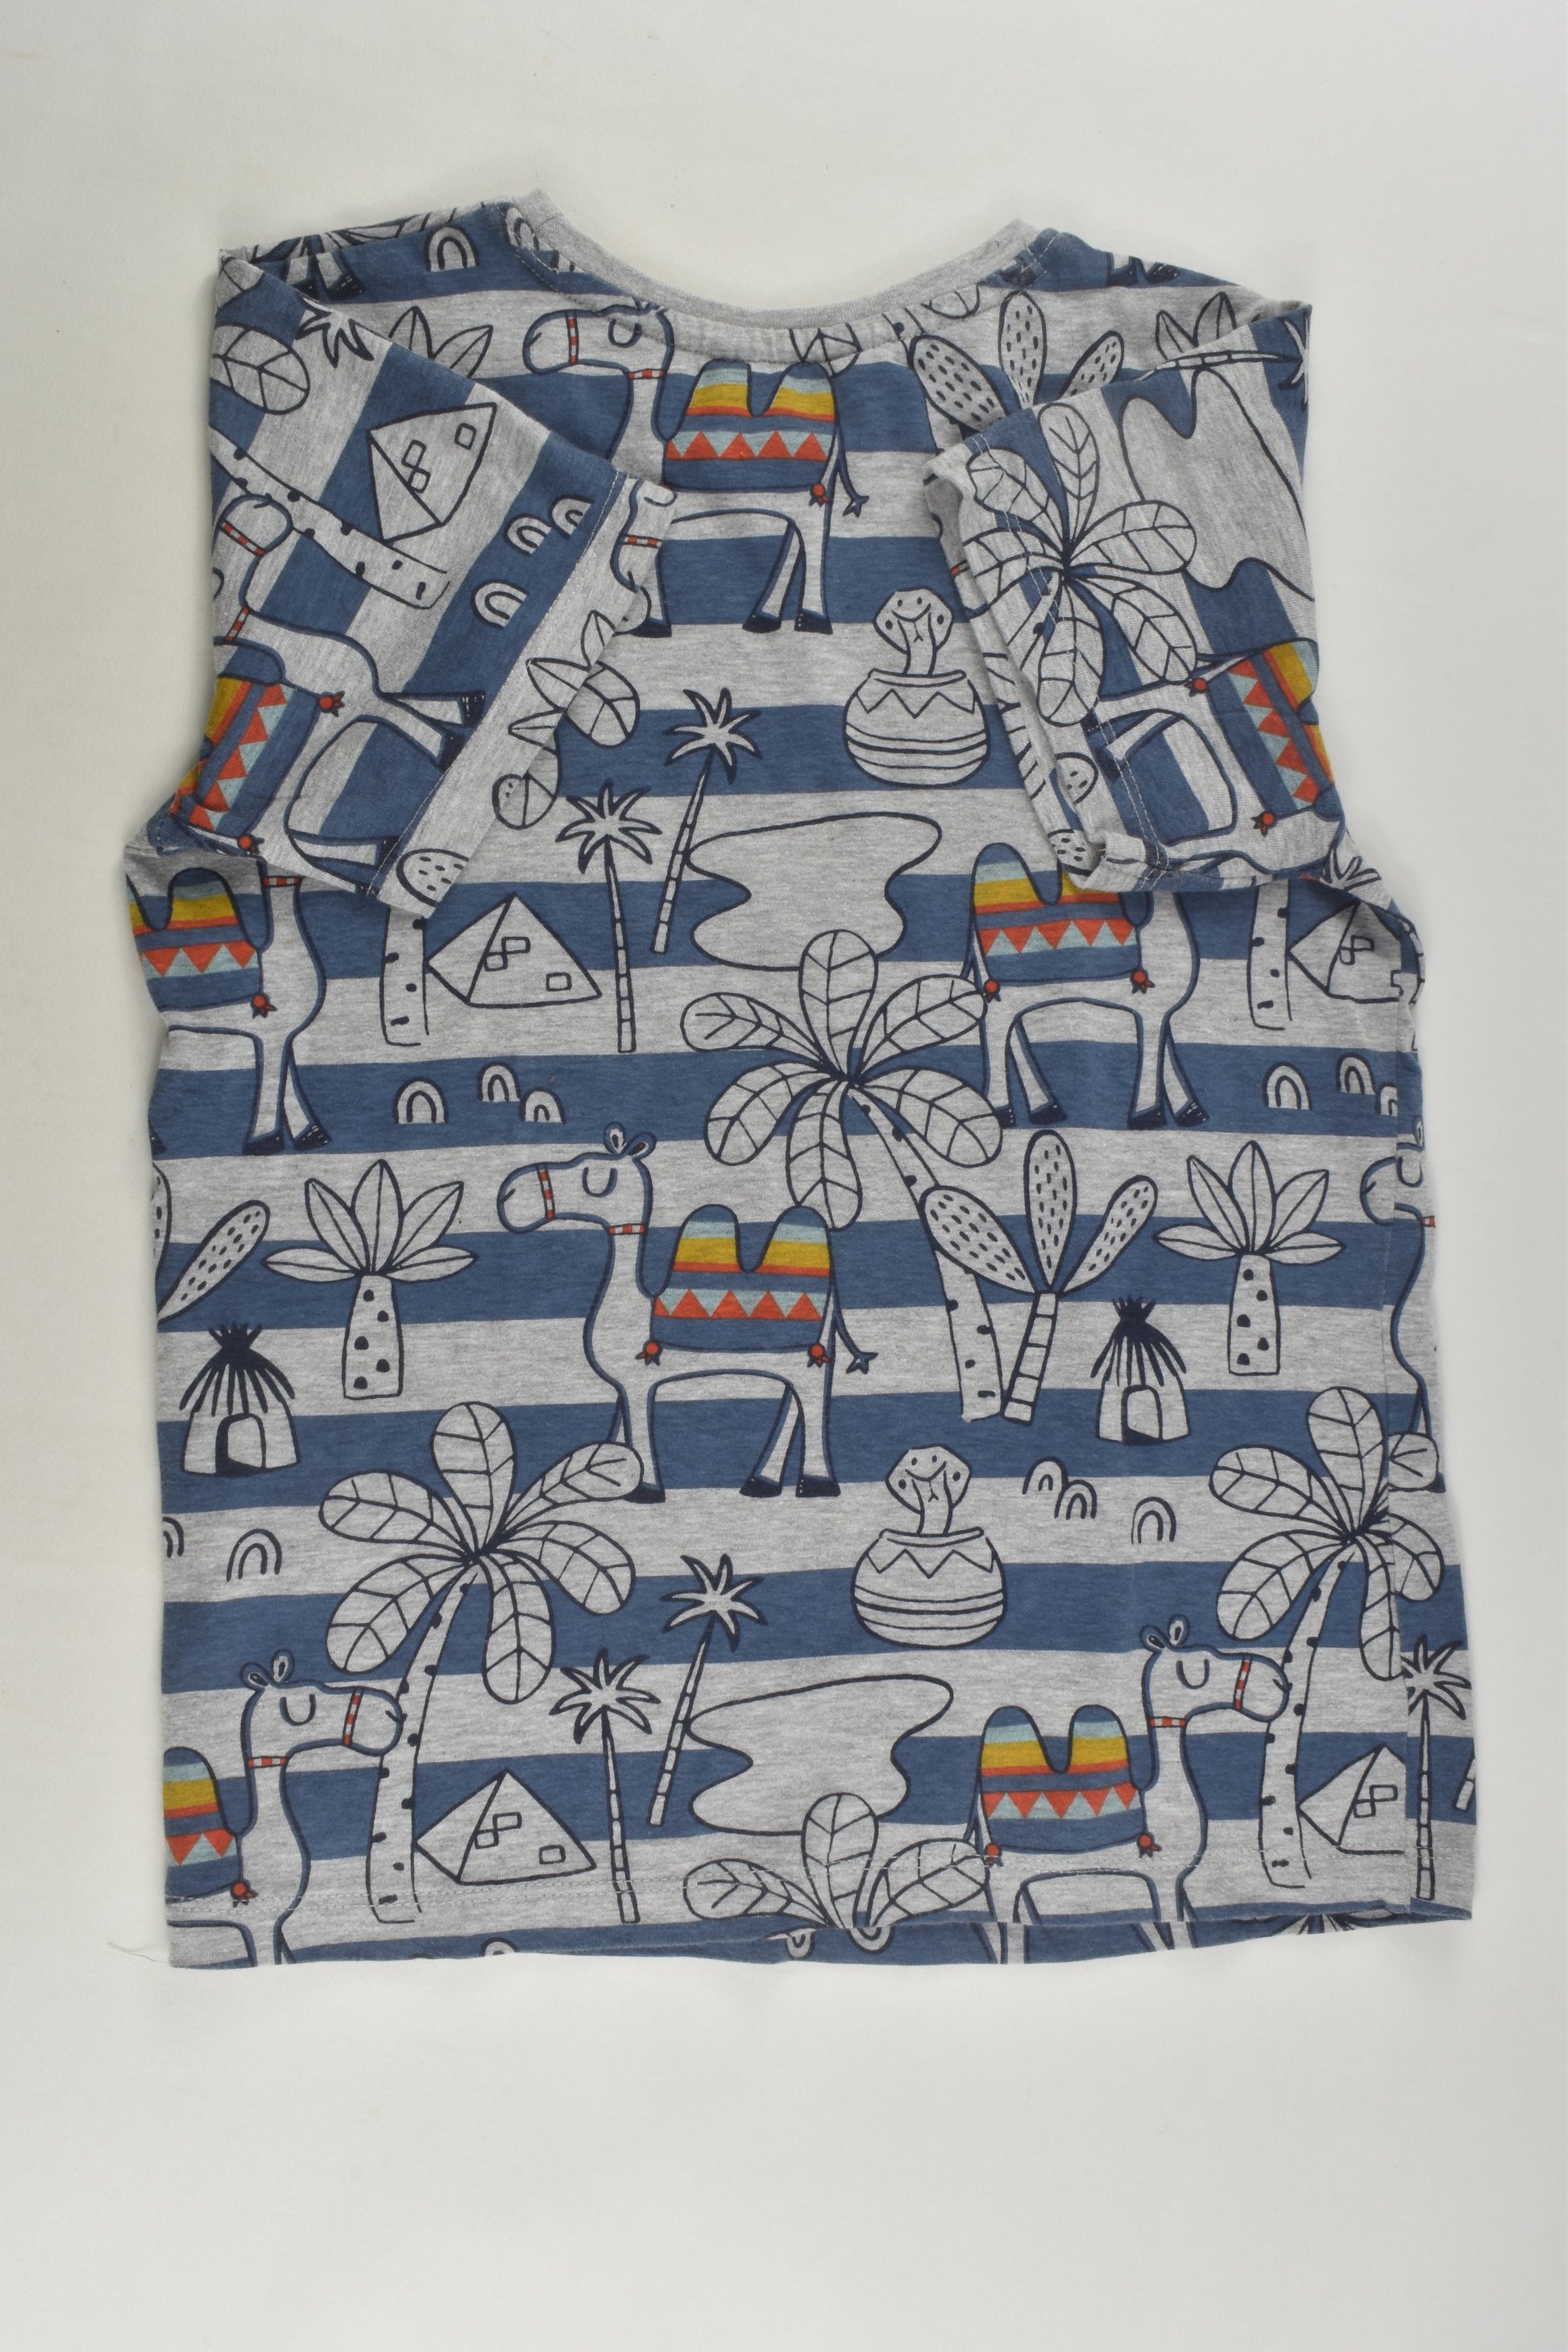 Jack & Milly Size 6 T-shirt